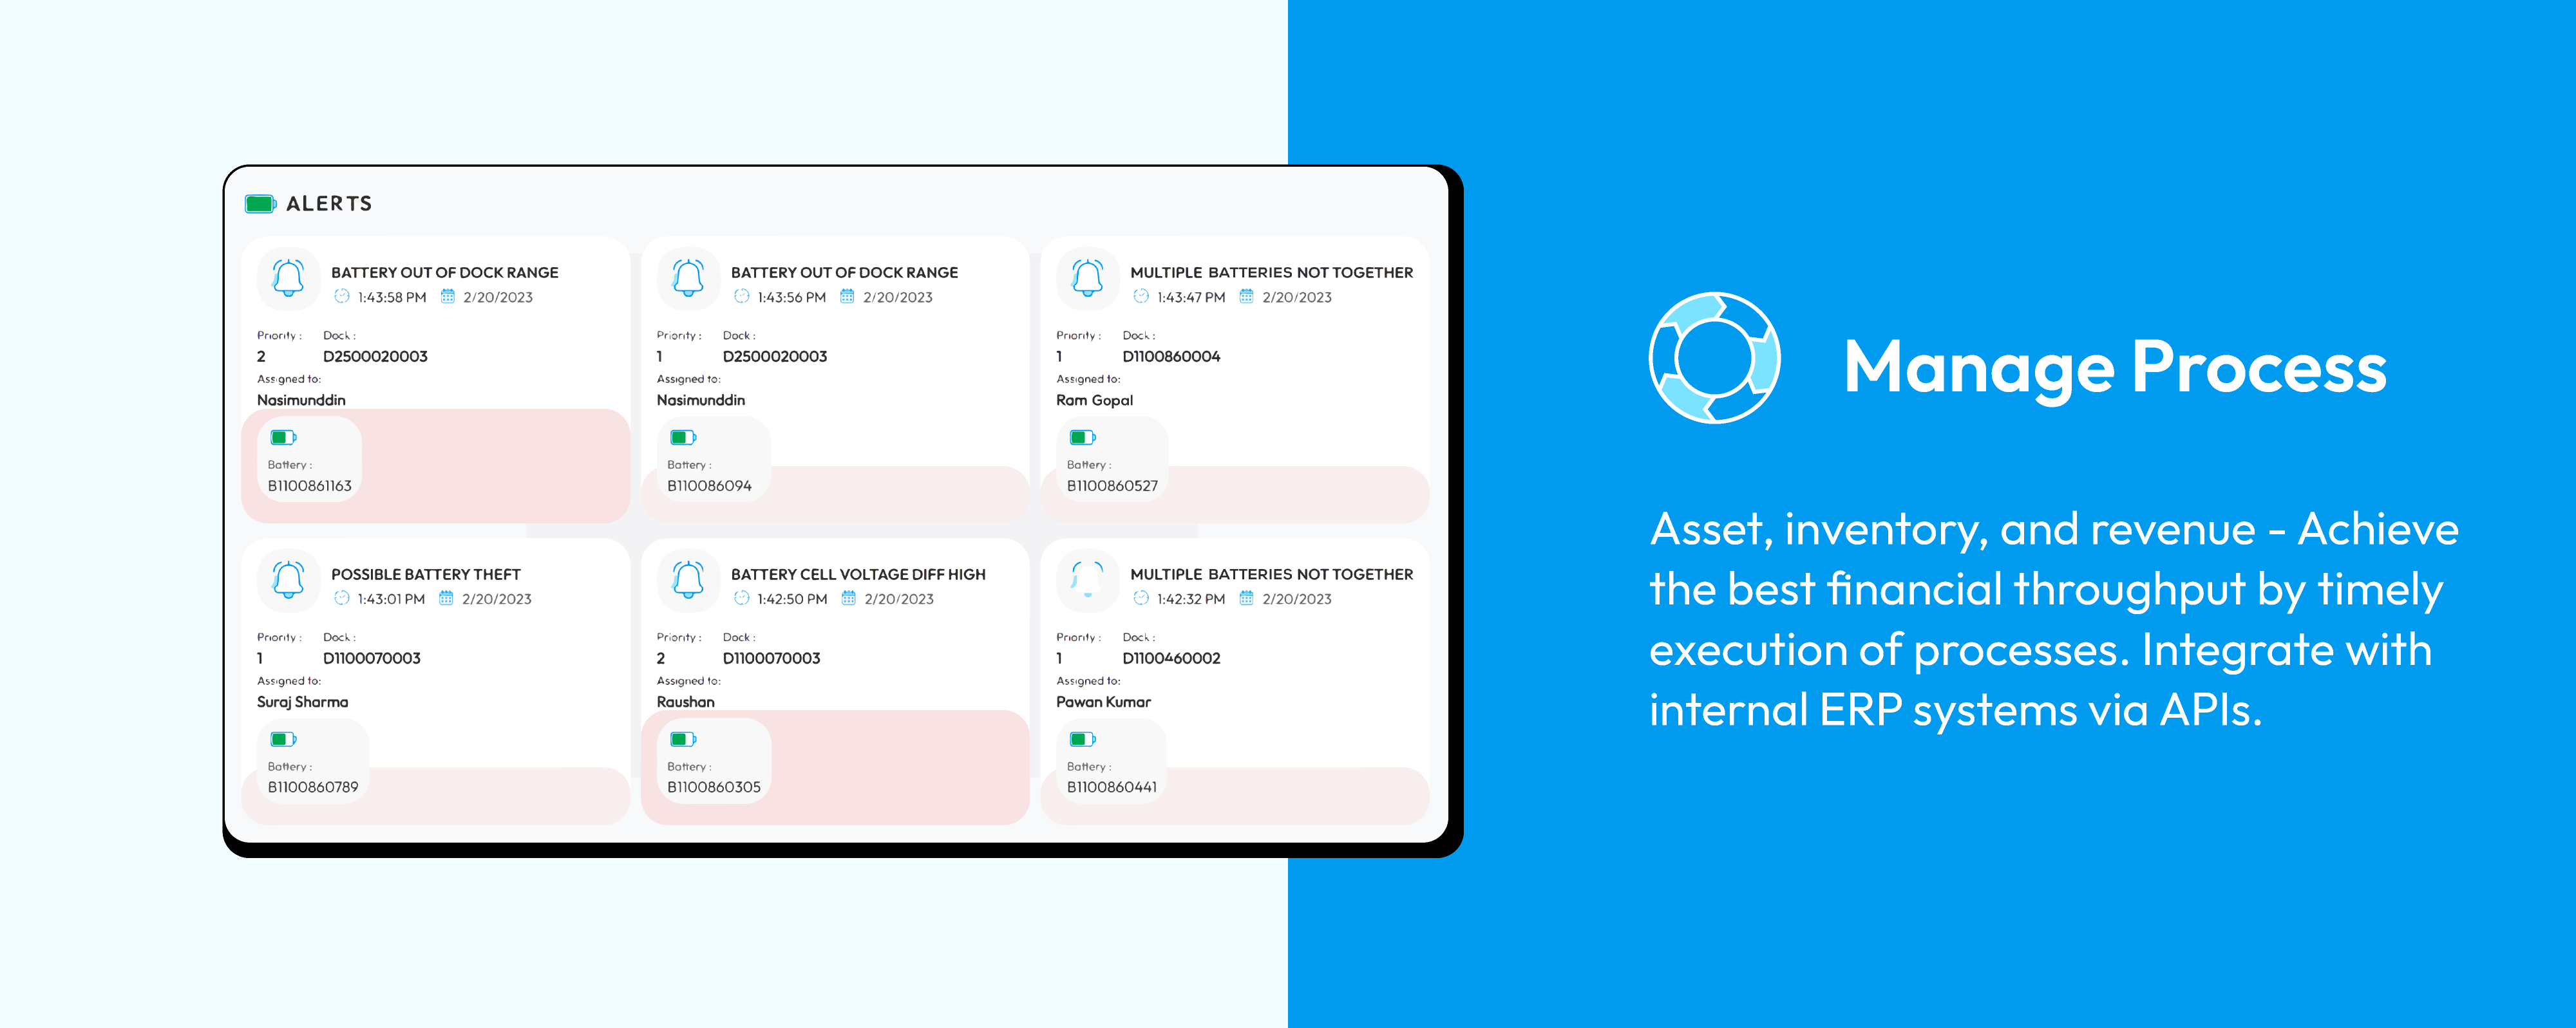 Manage process : Asset, inventory, and revenue - Achieve the best financial throughput by timely execution of processes. Integrate with internal ERP systems via APIs.